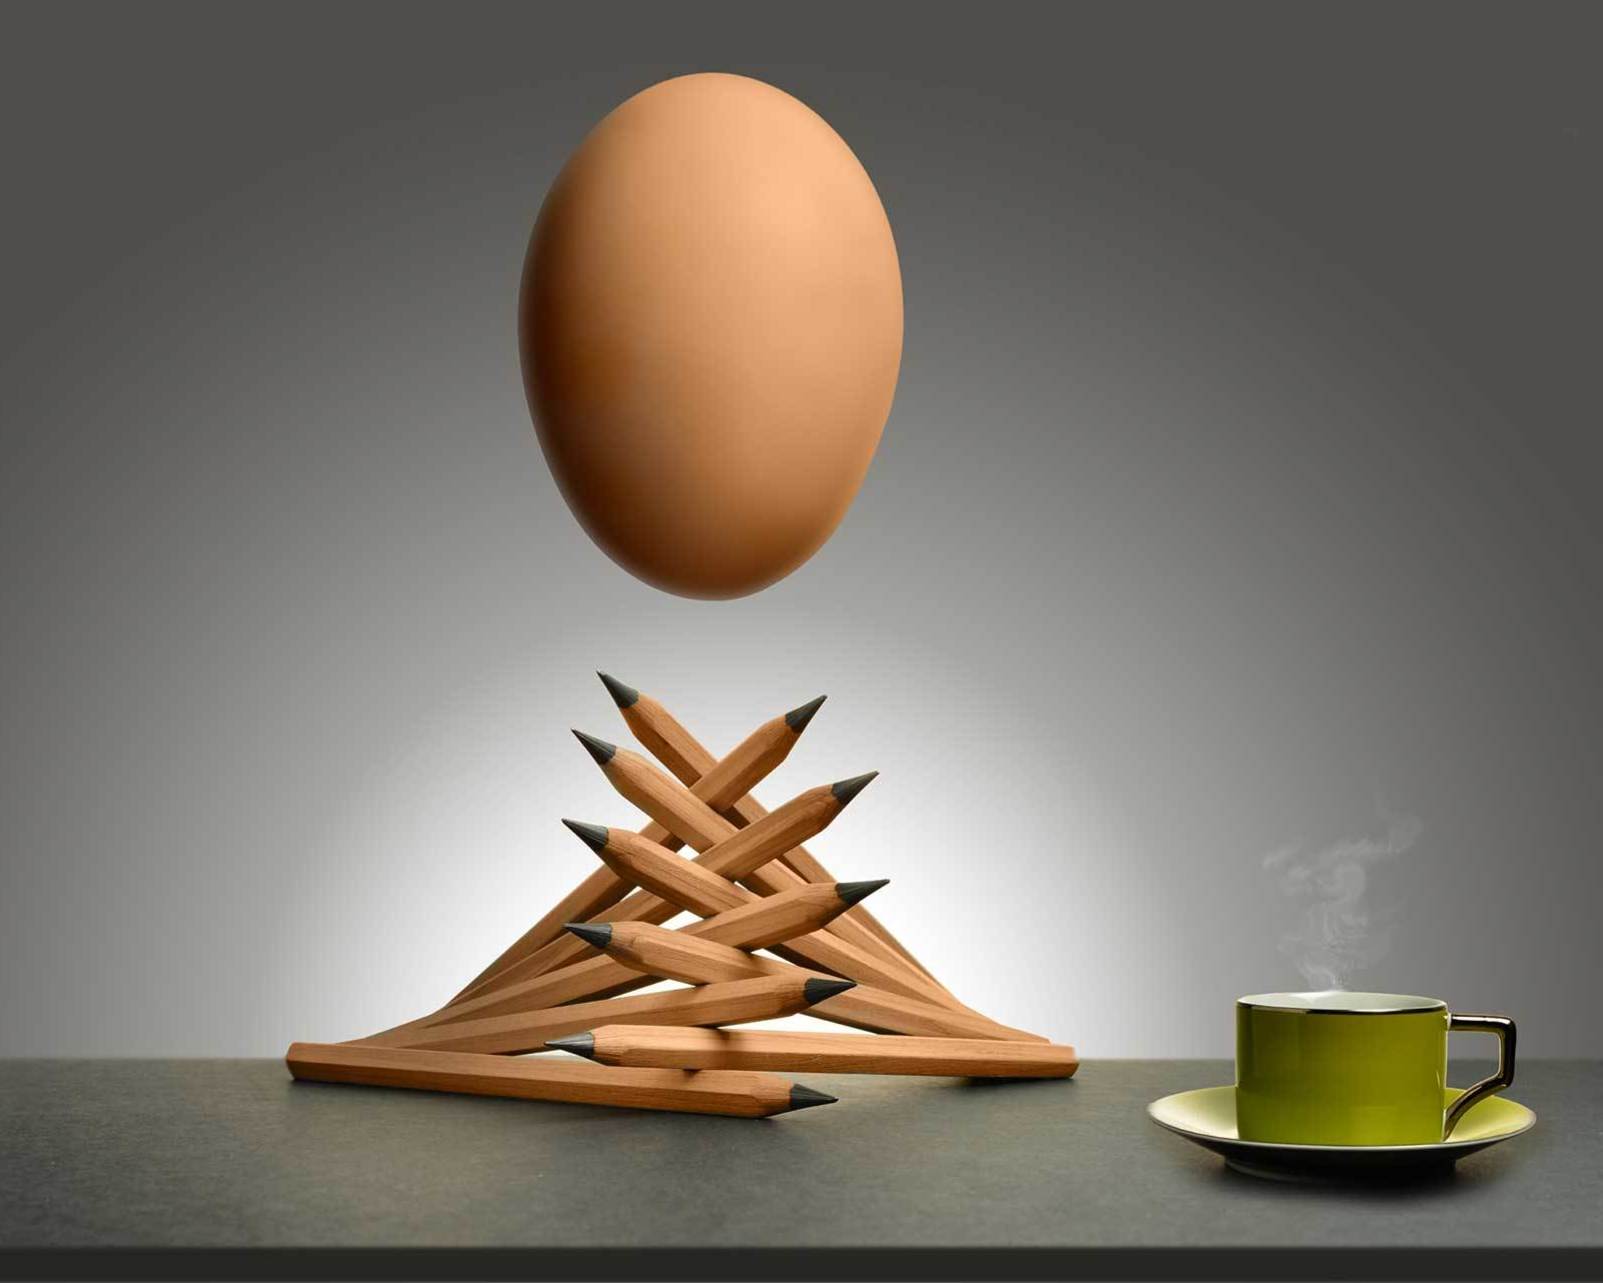 Egg With Pencil